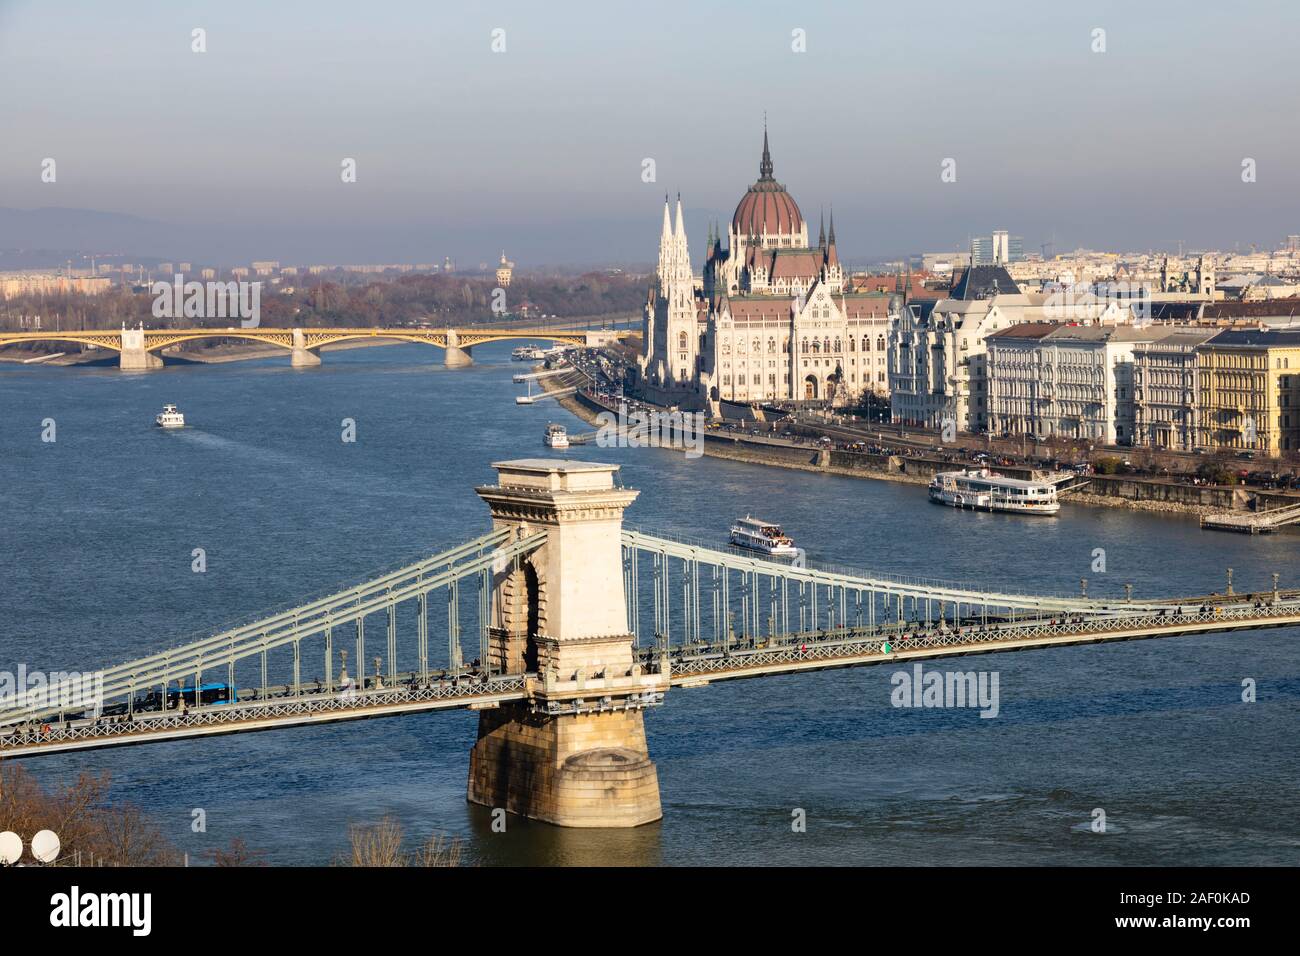 The Chain Bridge and Parliament Building, Winter in Budapest, Hungary. December 2019 Stock Photo